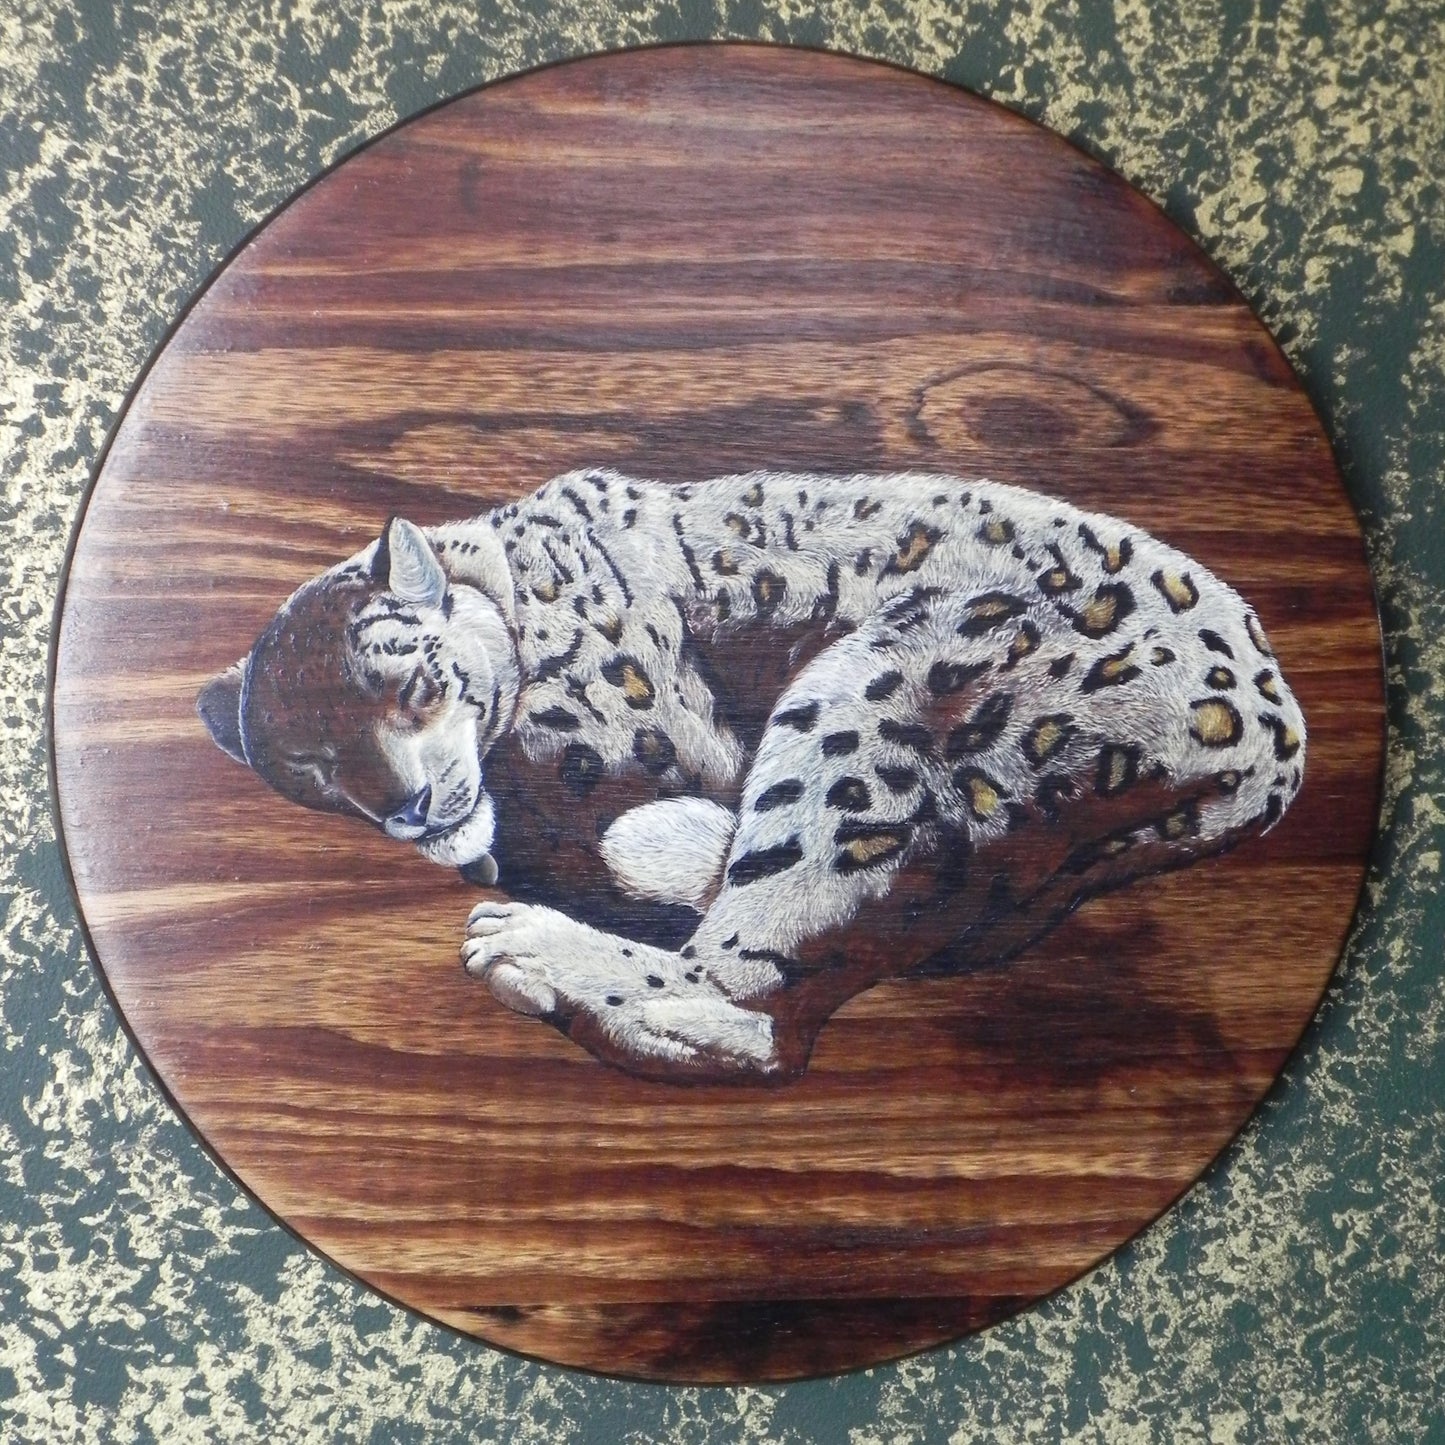 "Upon a Winter's Nap" wood plaque